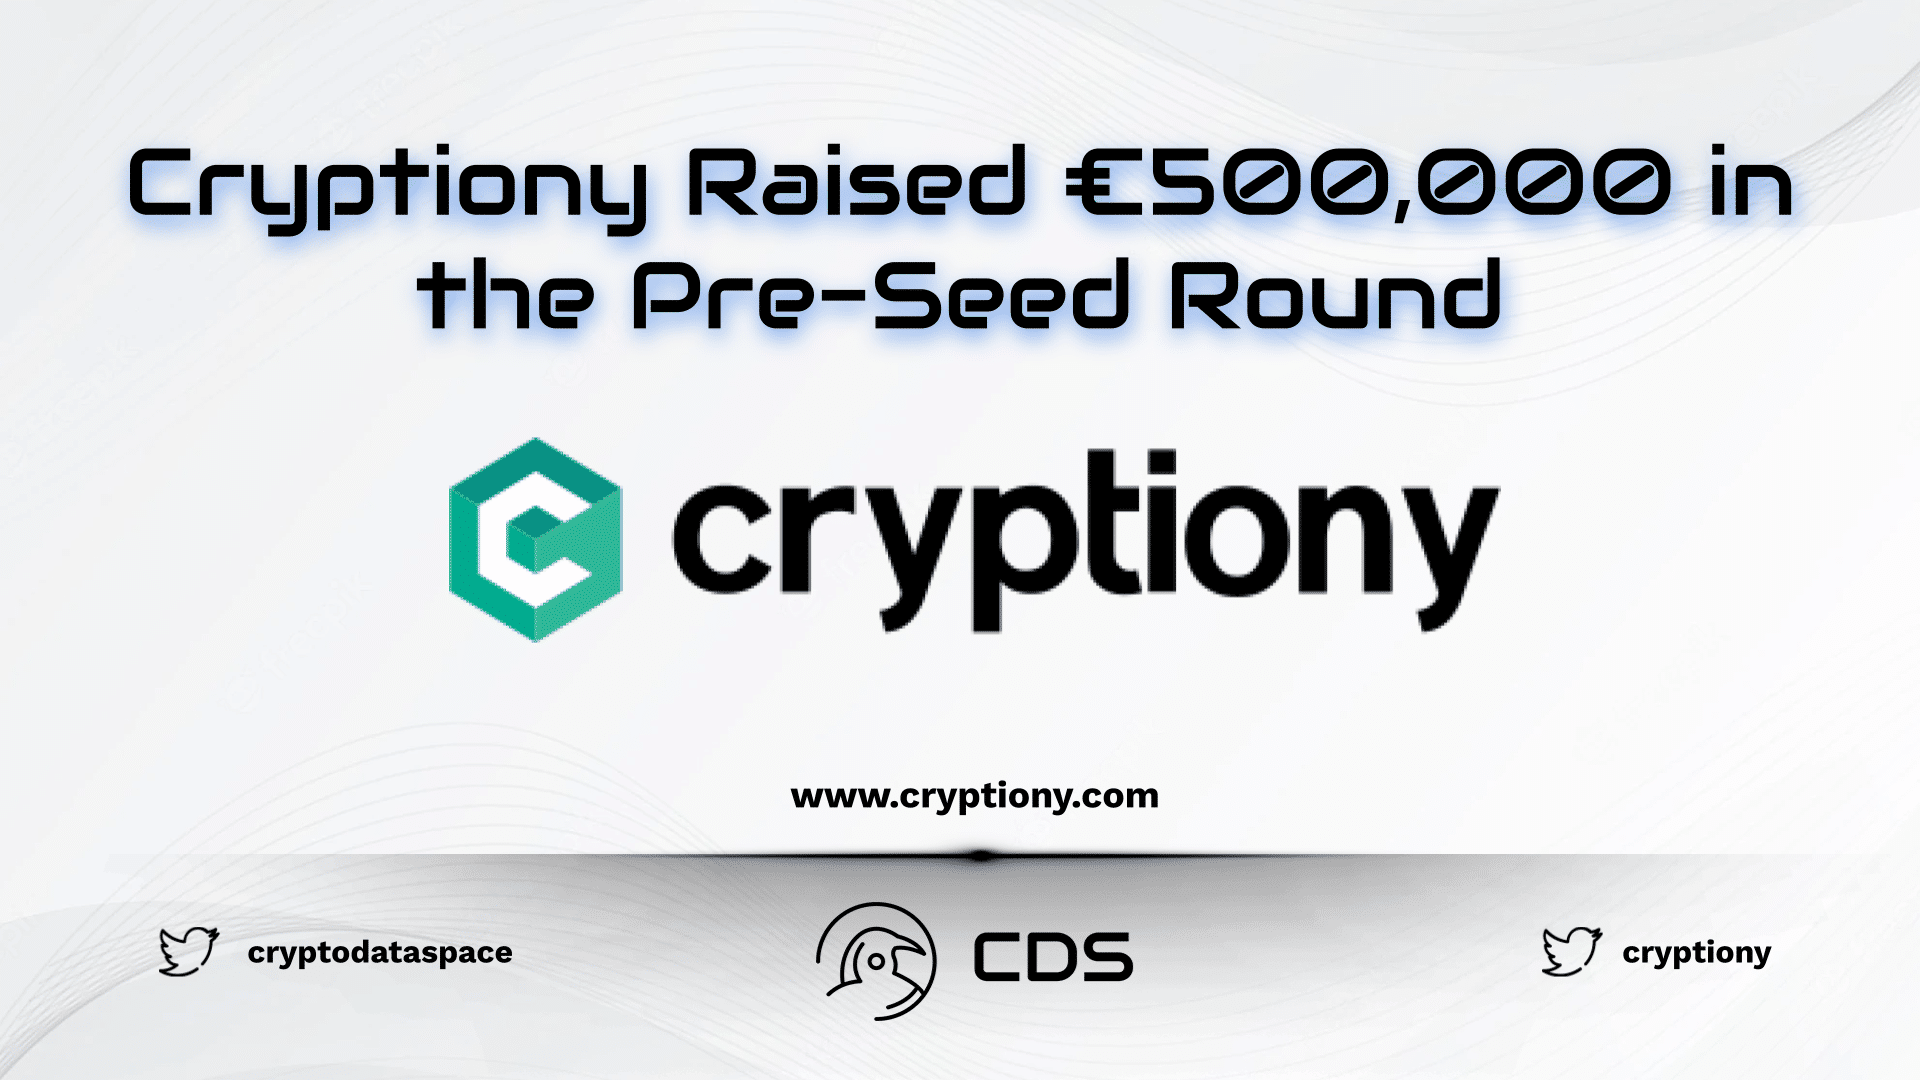 Cryptiony Raised €500,000 in the Pre-Seed Round